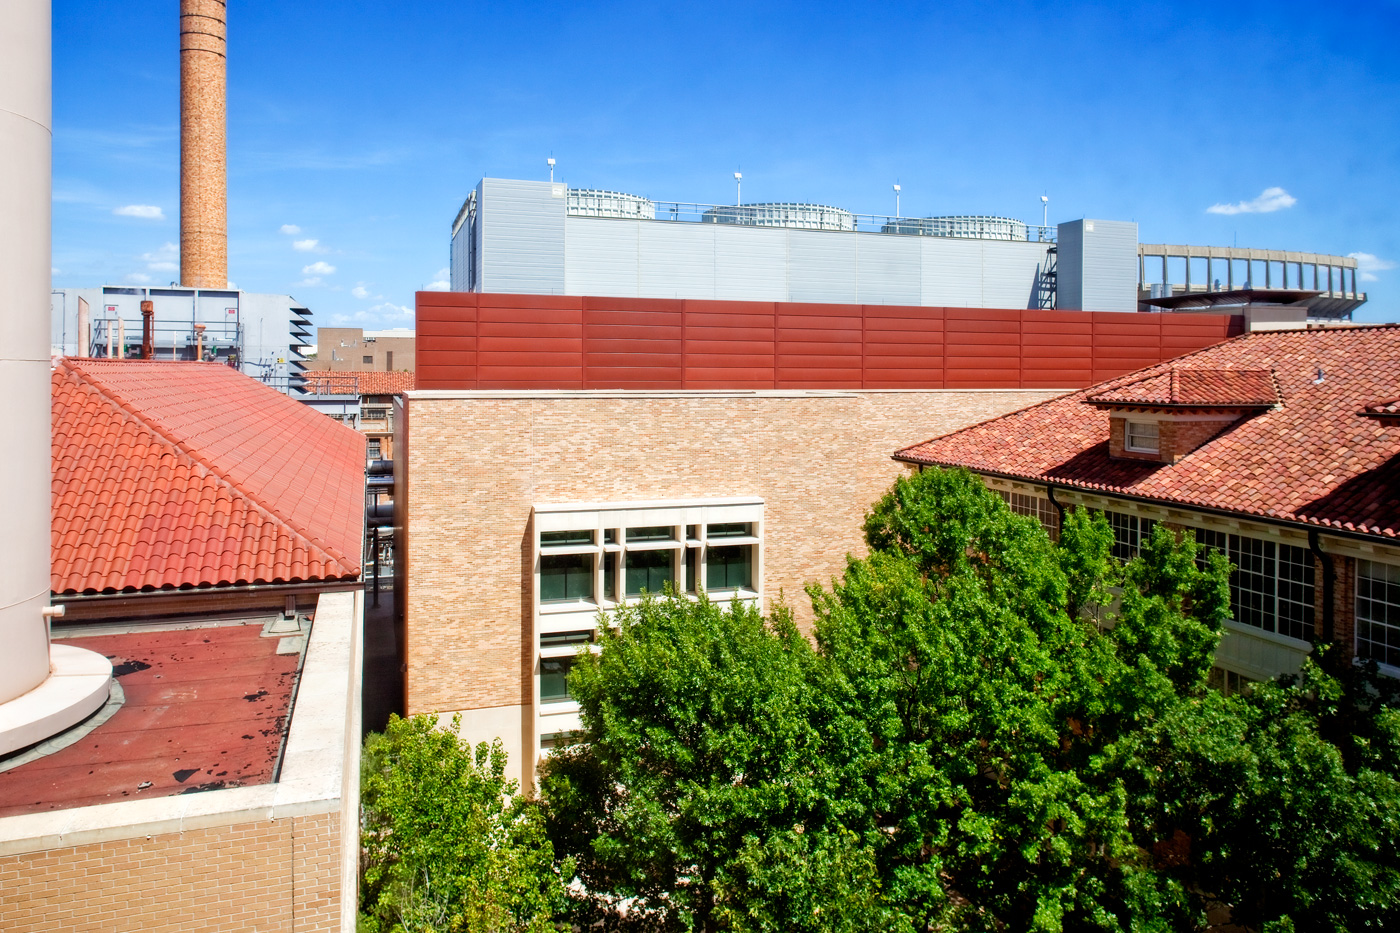 The rooftops of university buildings.